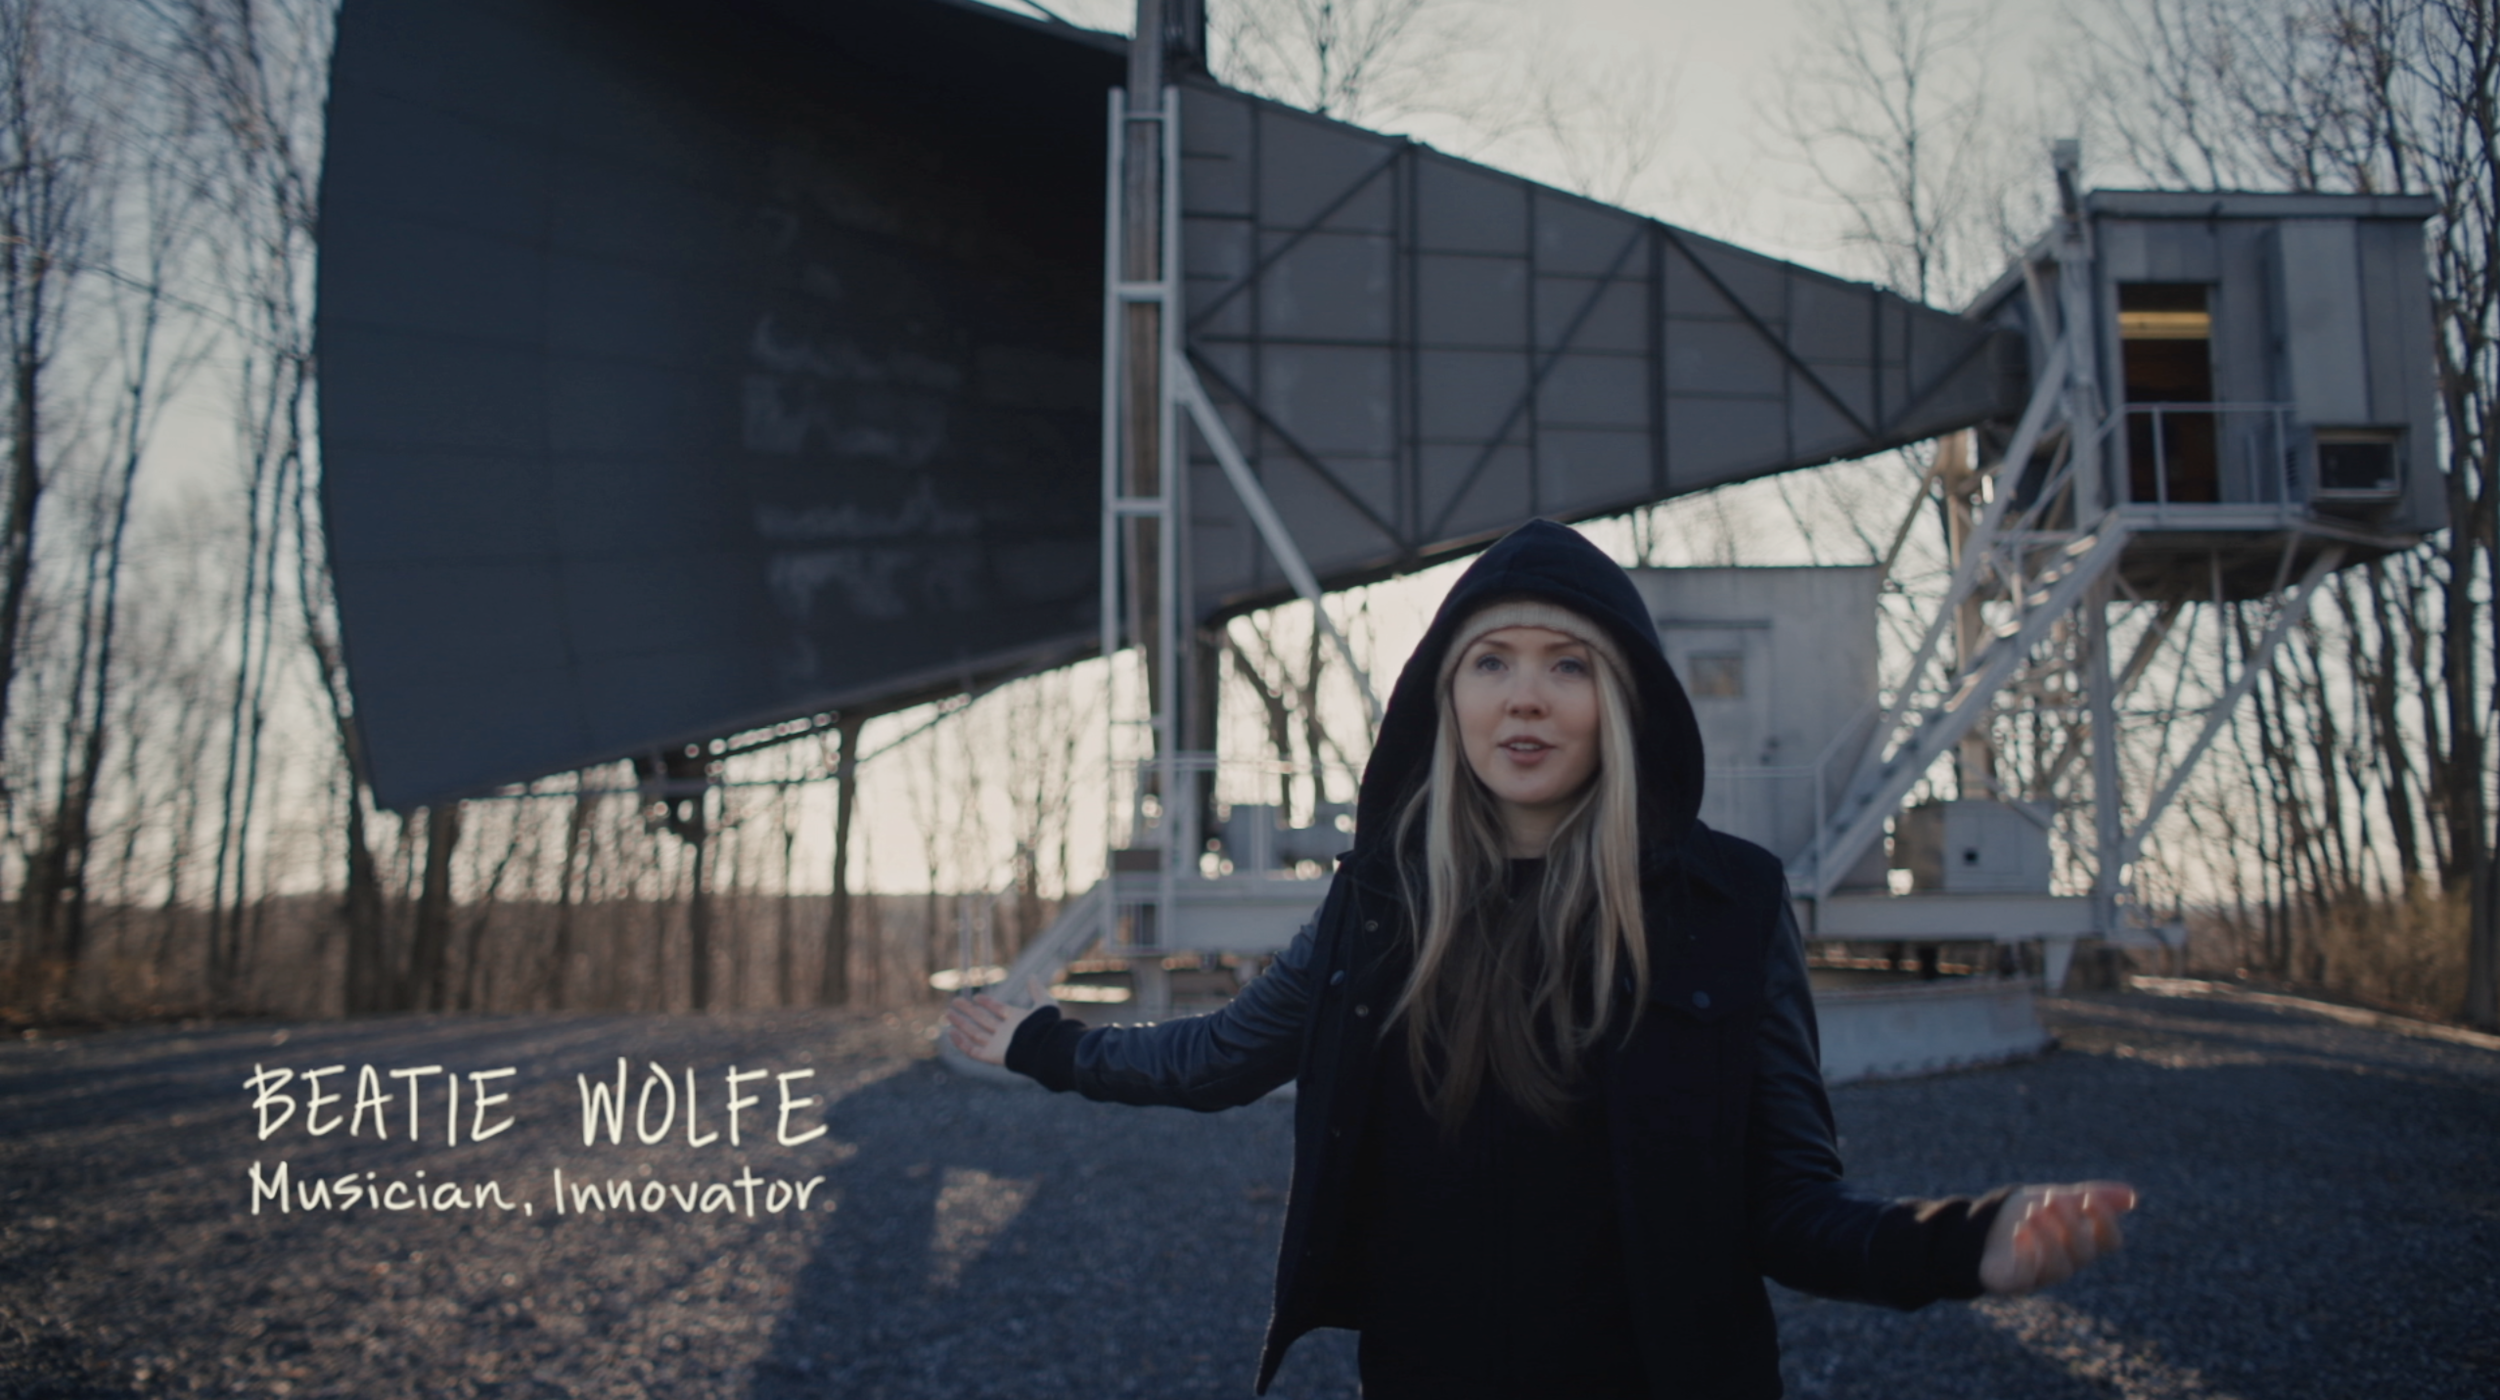 Beatie Wolfe - 2018 Raw Space Beam - Nokia Bell Labs Holmdel Horn Antenna